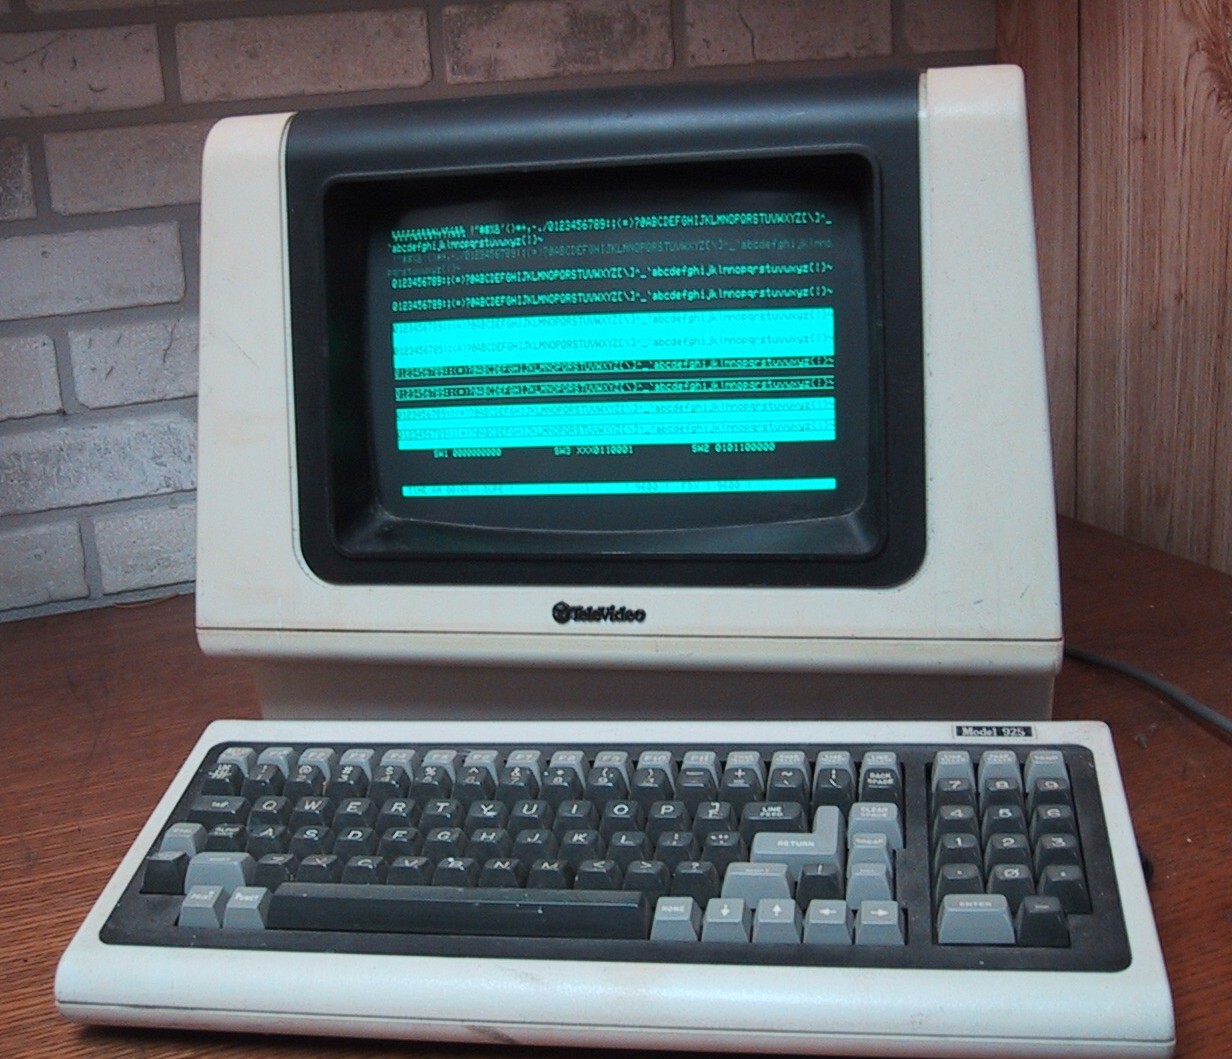 A terminal with CRT display